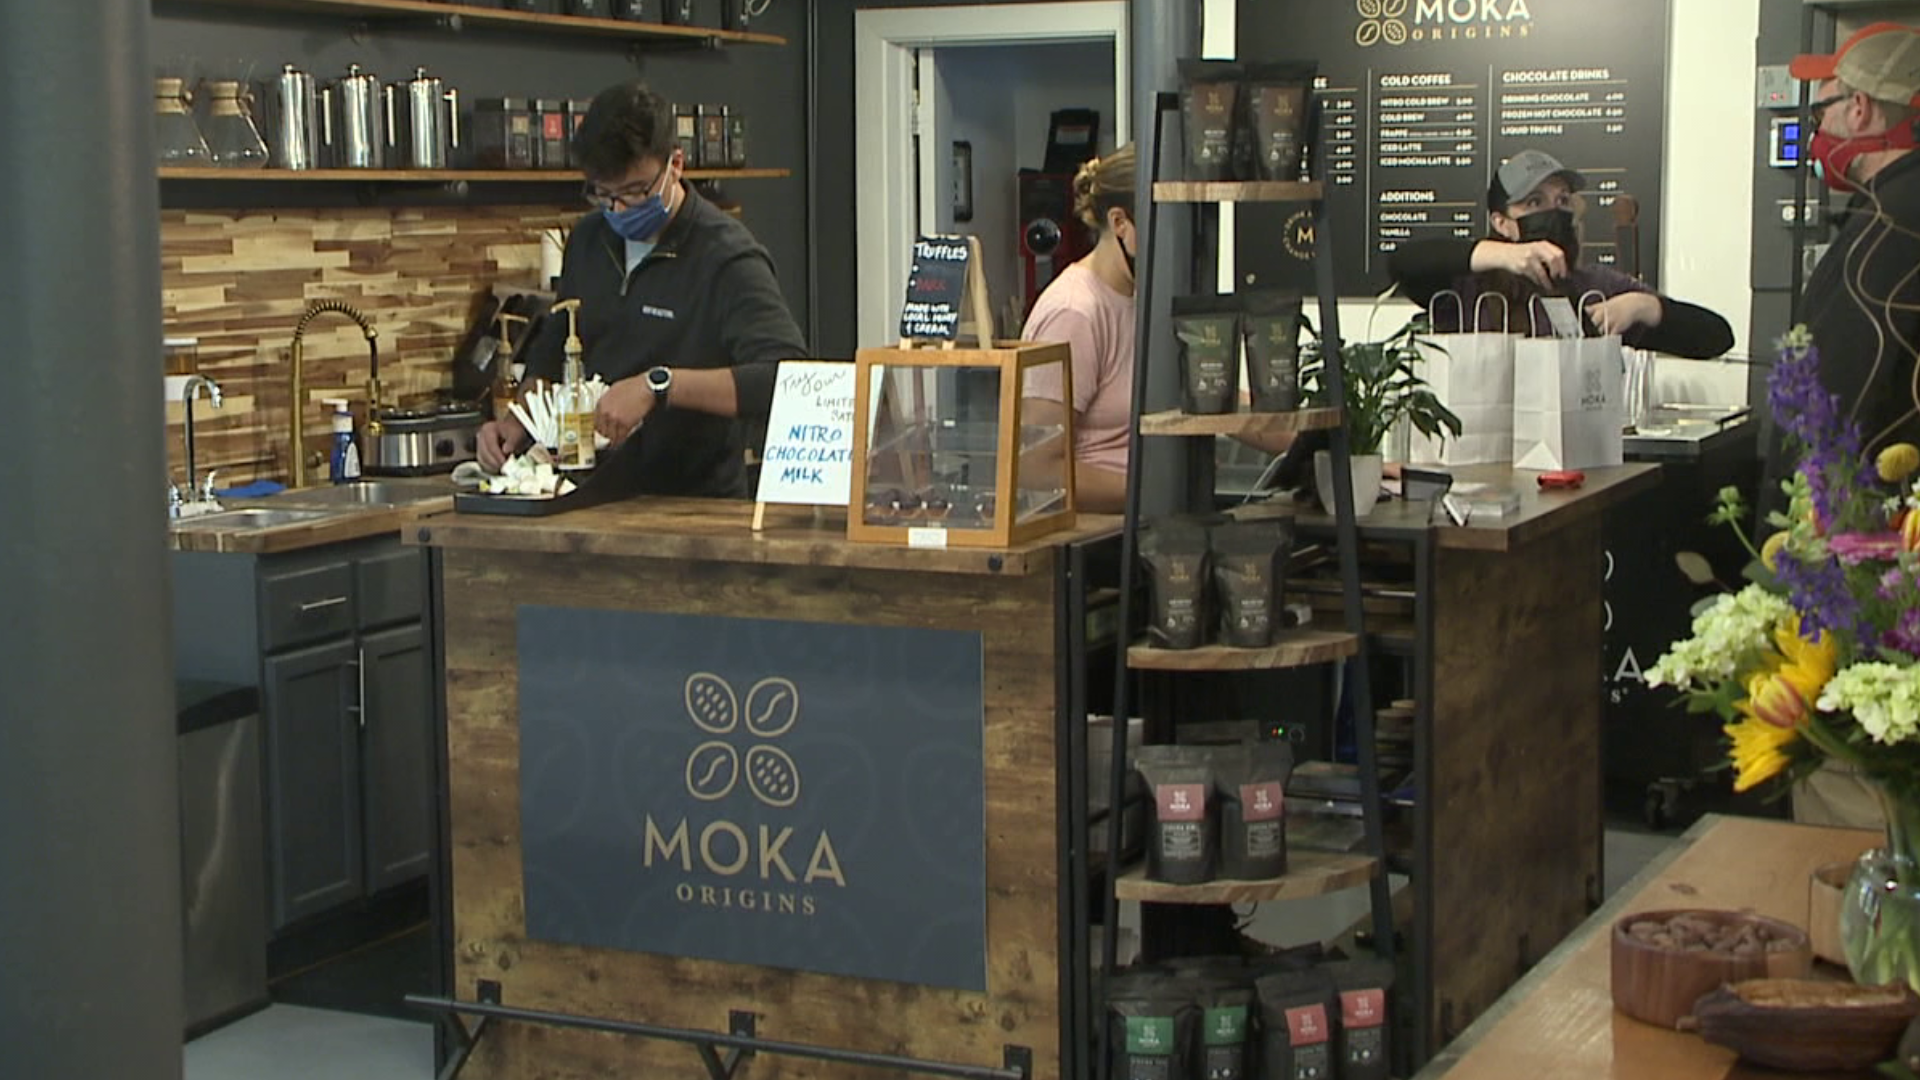 If you love chocolate and coffee, then Moka Origins is the place for you.